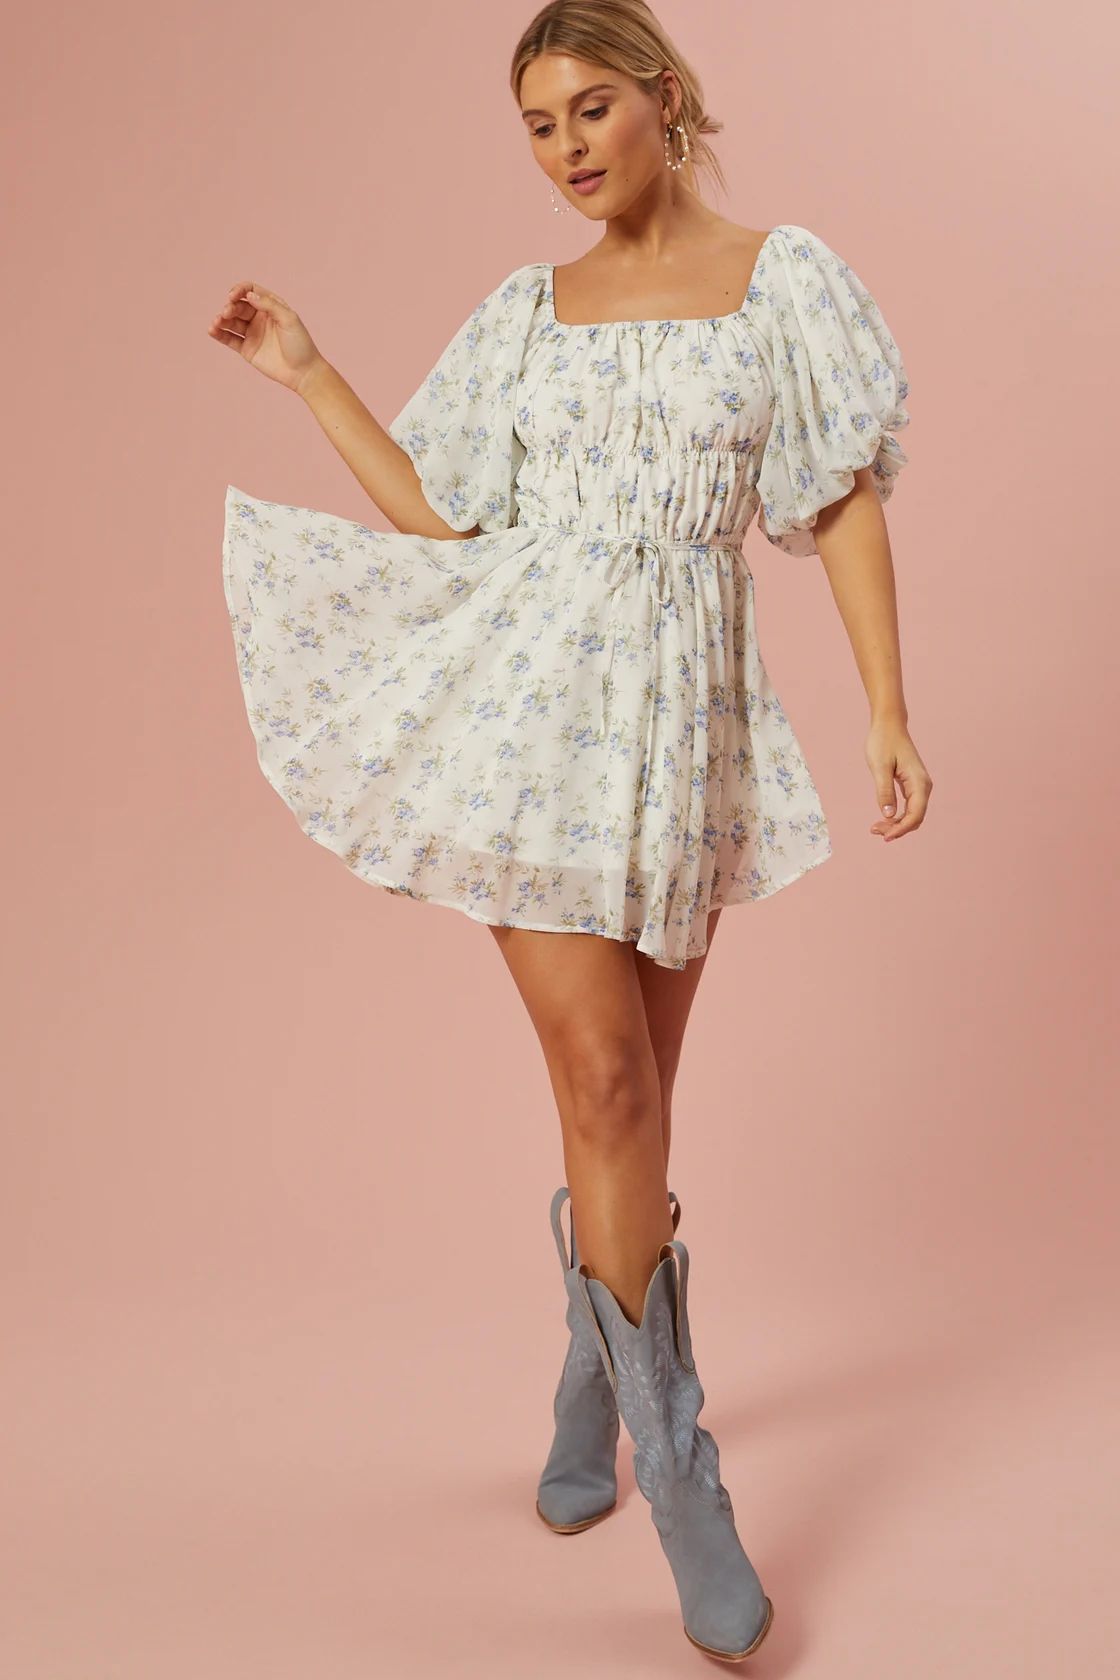 Amabella Floral Puff Dress in Ivory & Blue | Altar'd State | Altar'd State